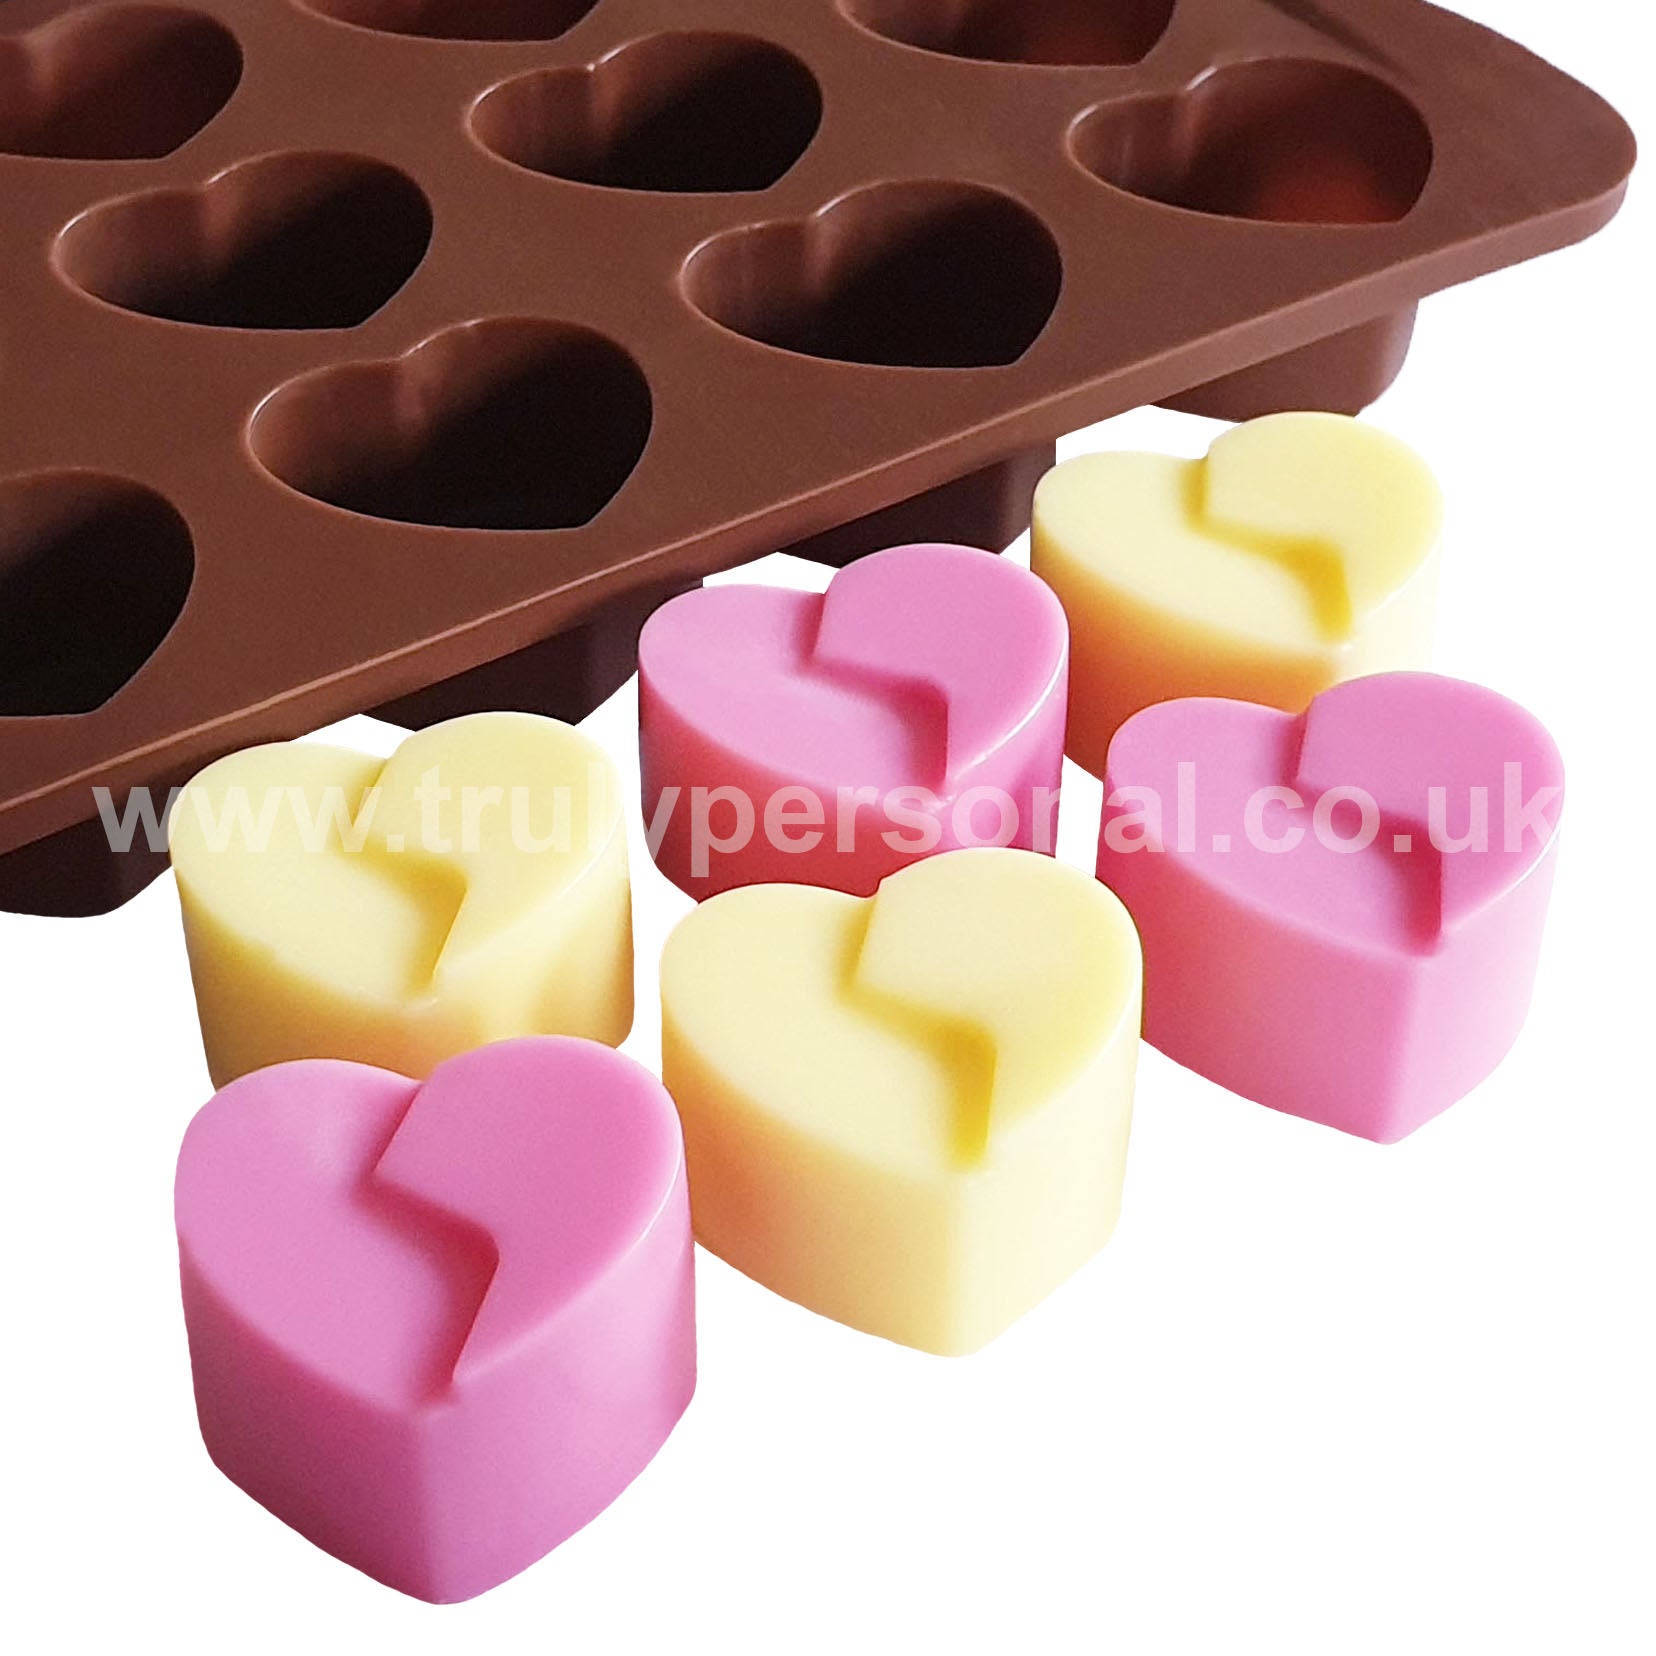 Split Heart Silicone Mould | Wax Melts | Truly Personal Ltd